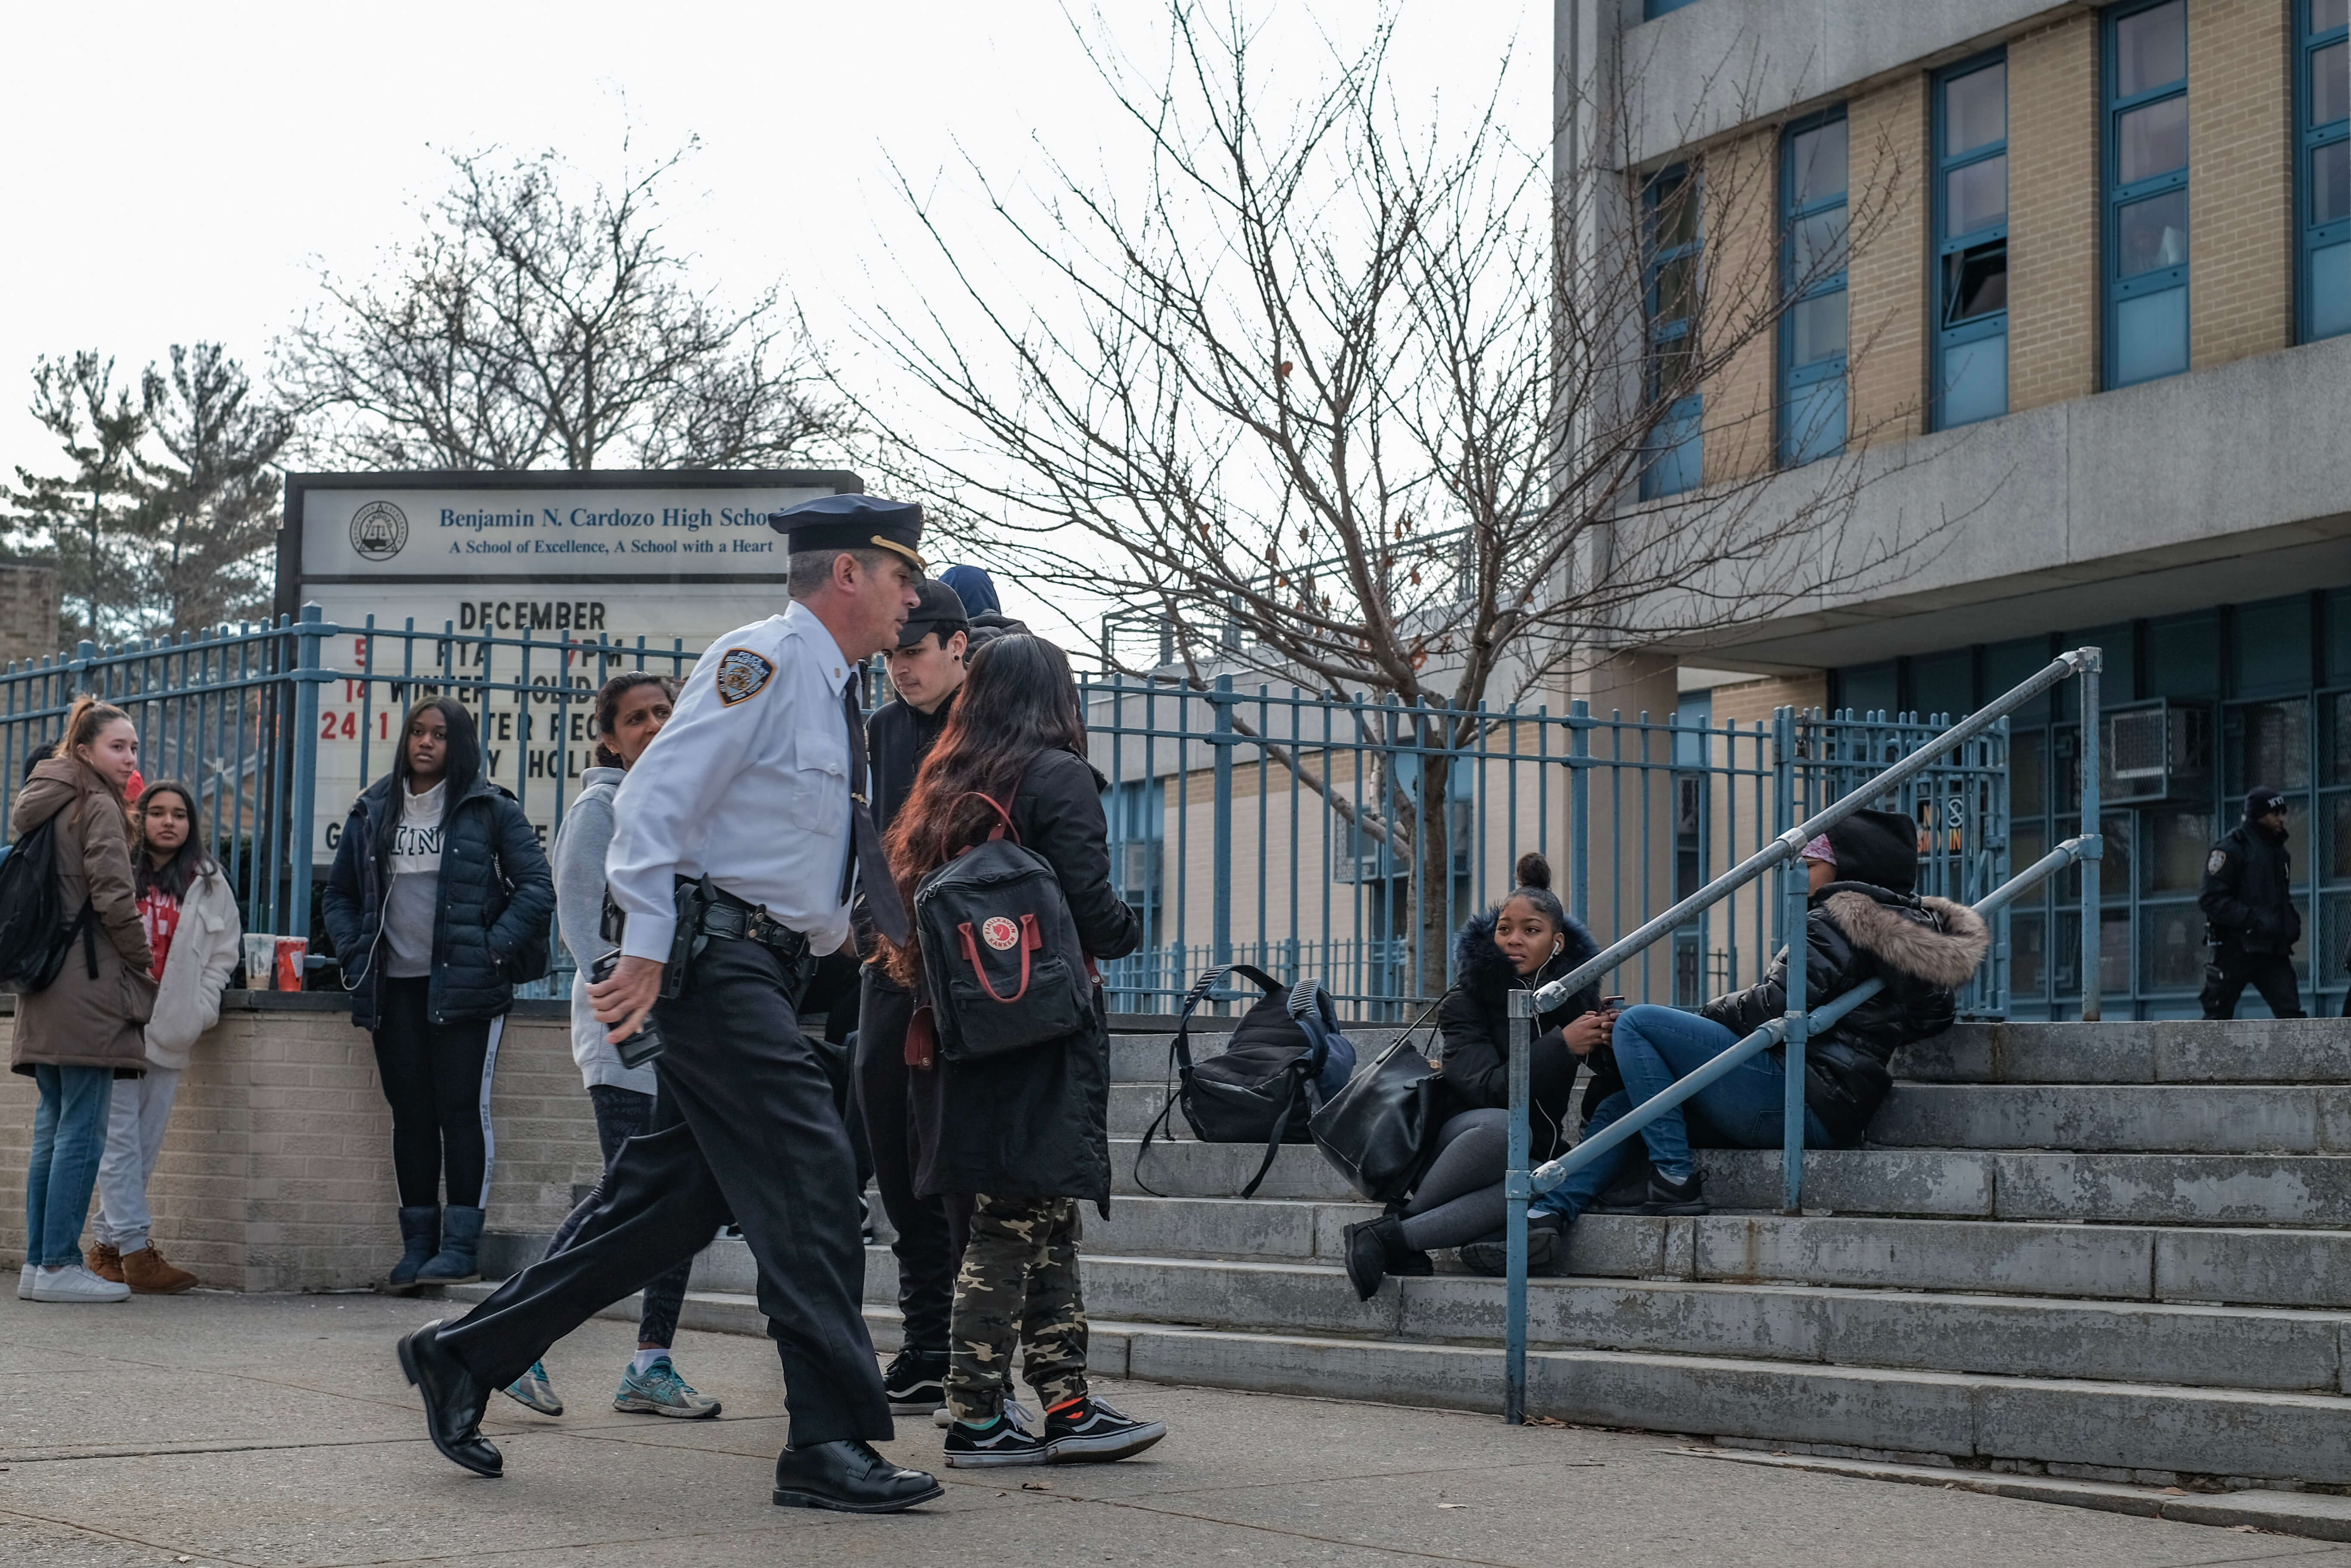 A police official walks past students outside of Benjamin Cardozo High School in Bayside during the Dec. 11 lockdown.